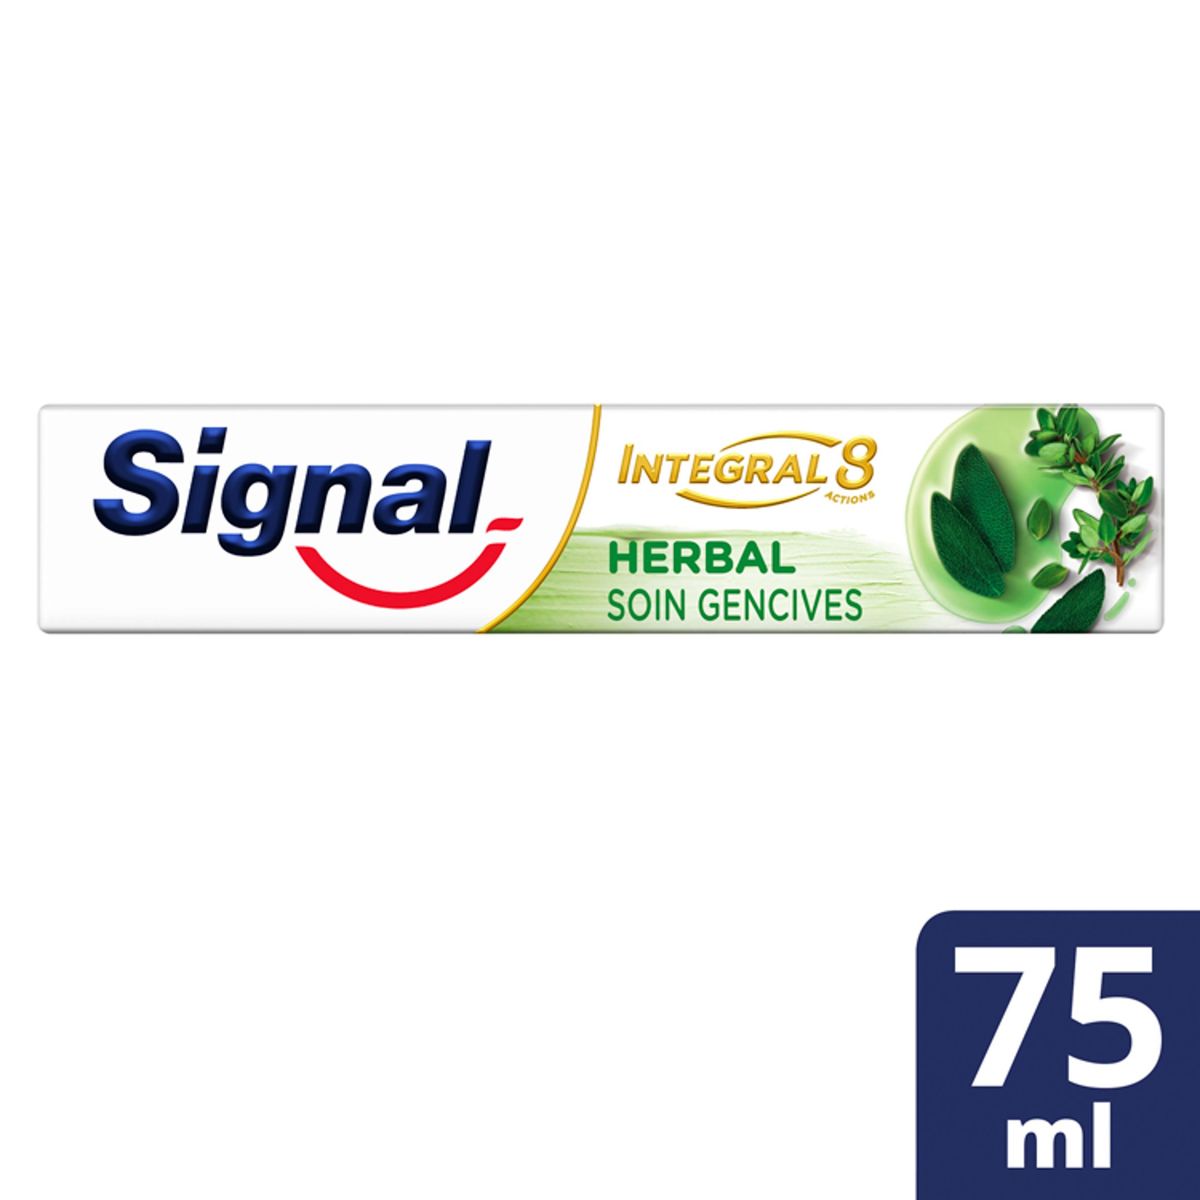 Signal Integral 8 Nature Elements Dentifrice Herbal 75 ml